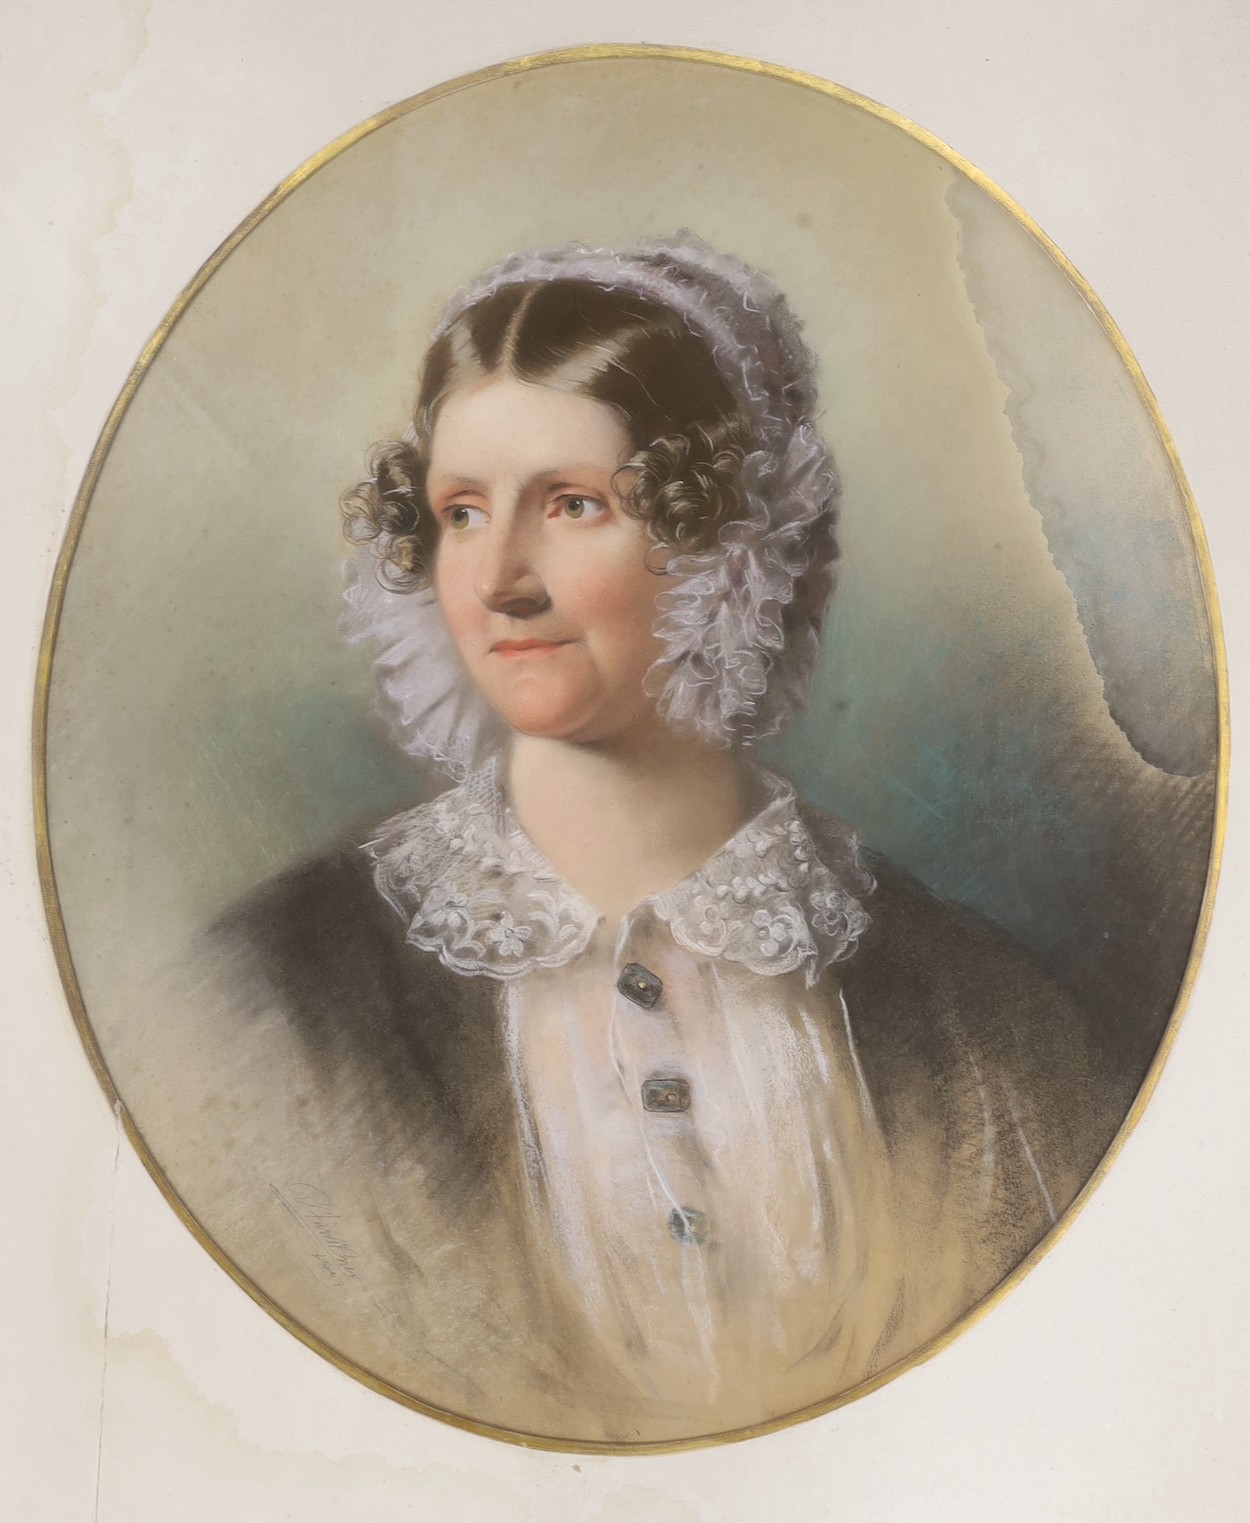 R. Faulkner, a pastel portrait of Georgiana, Viscountess Cross, (née Lyon), 1828 – 1907, signed and dated 1897, 64 x 53cm, waterstained